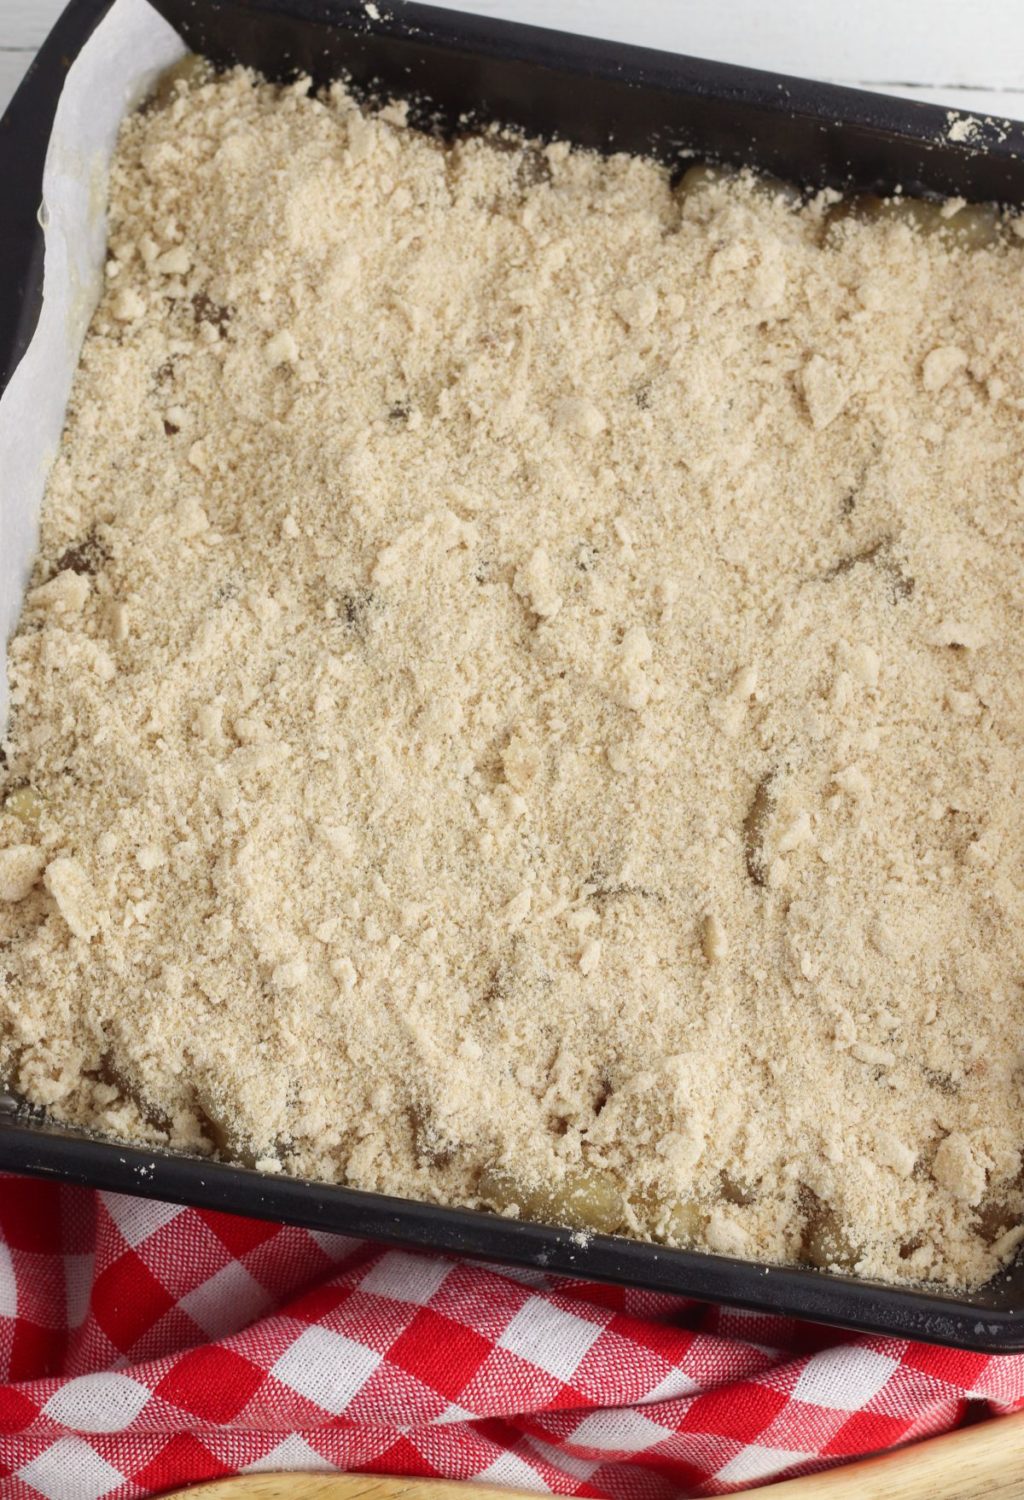 A baking dish with a crumb topping on it.